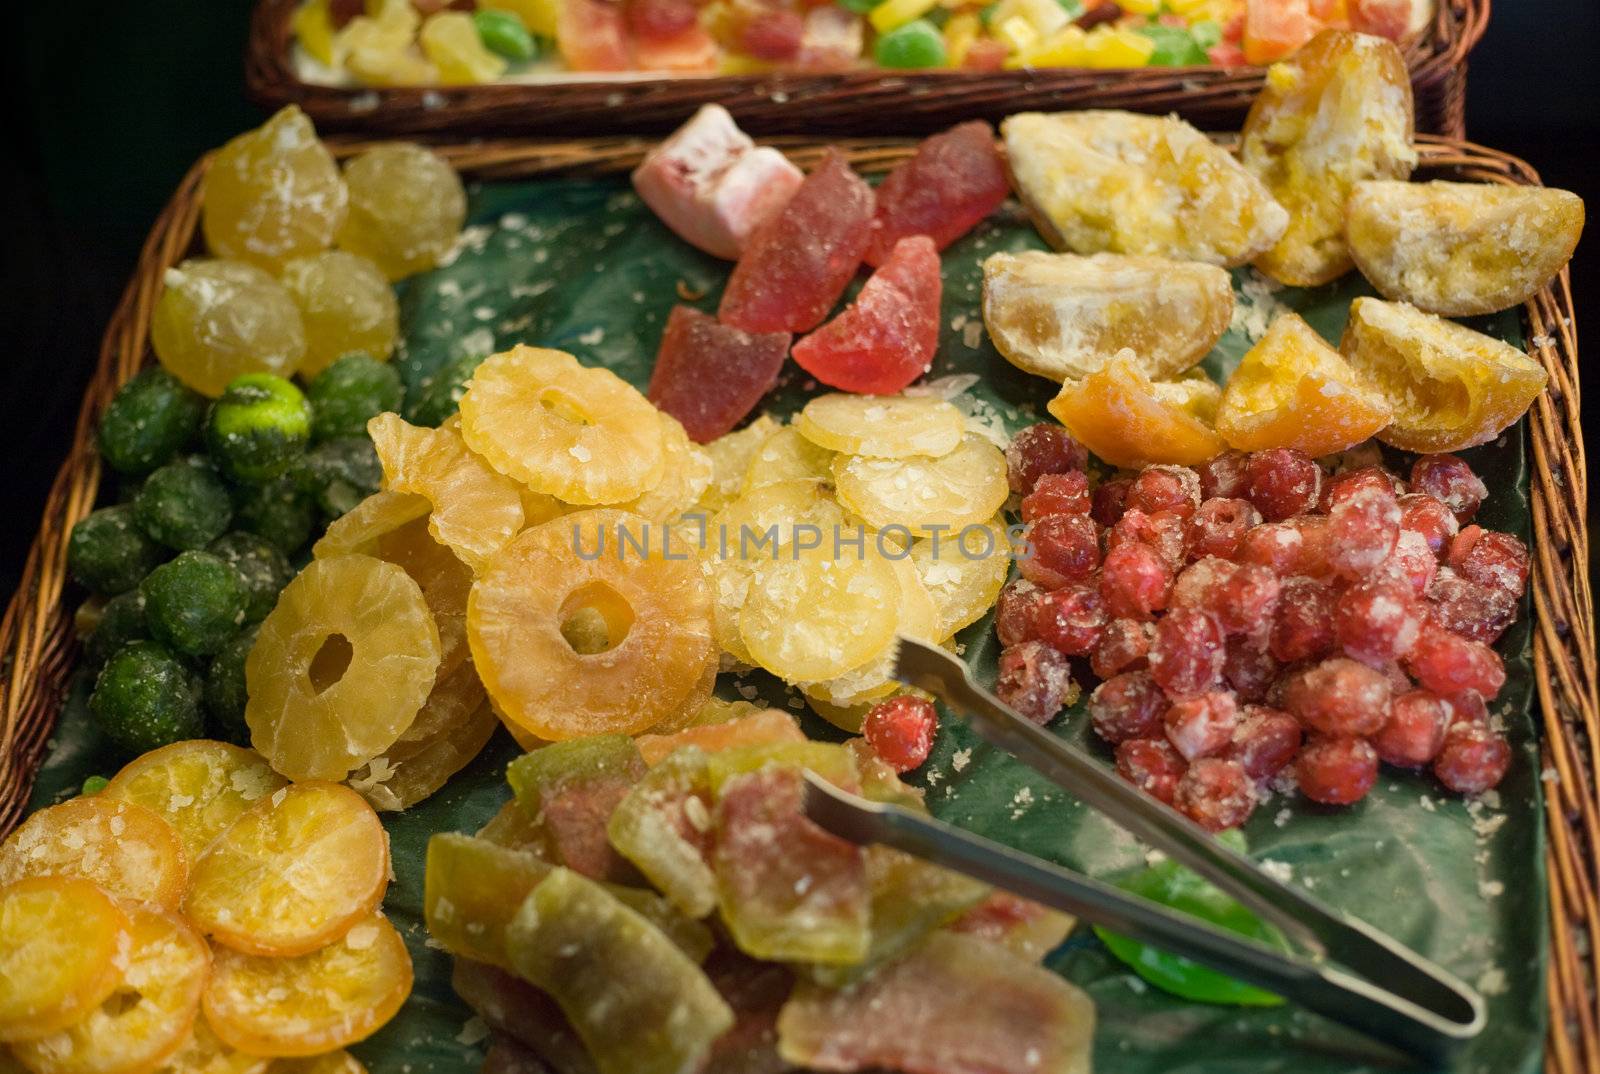 Basket in market stall with a colorful assortment of crystallized fruits. Shallow focus.